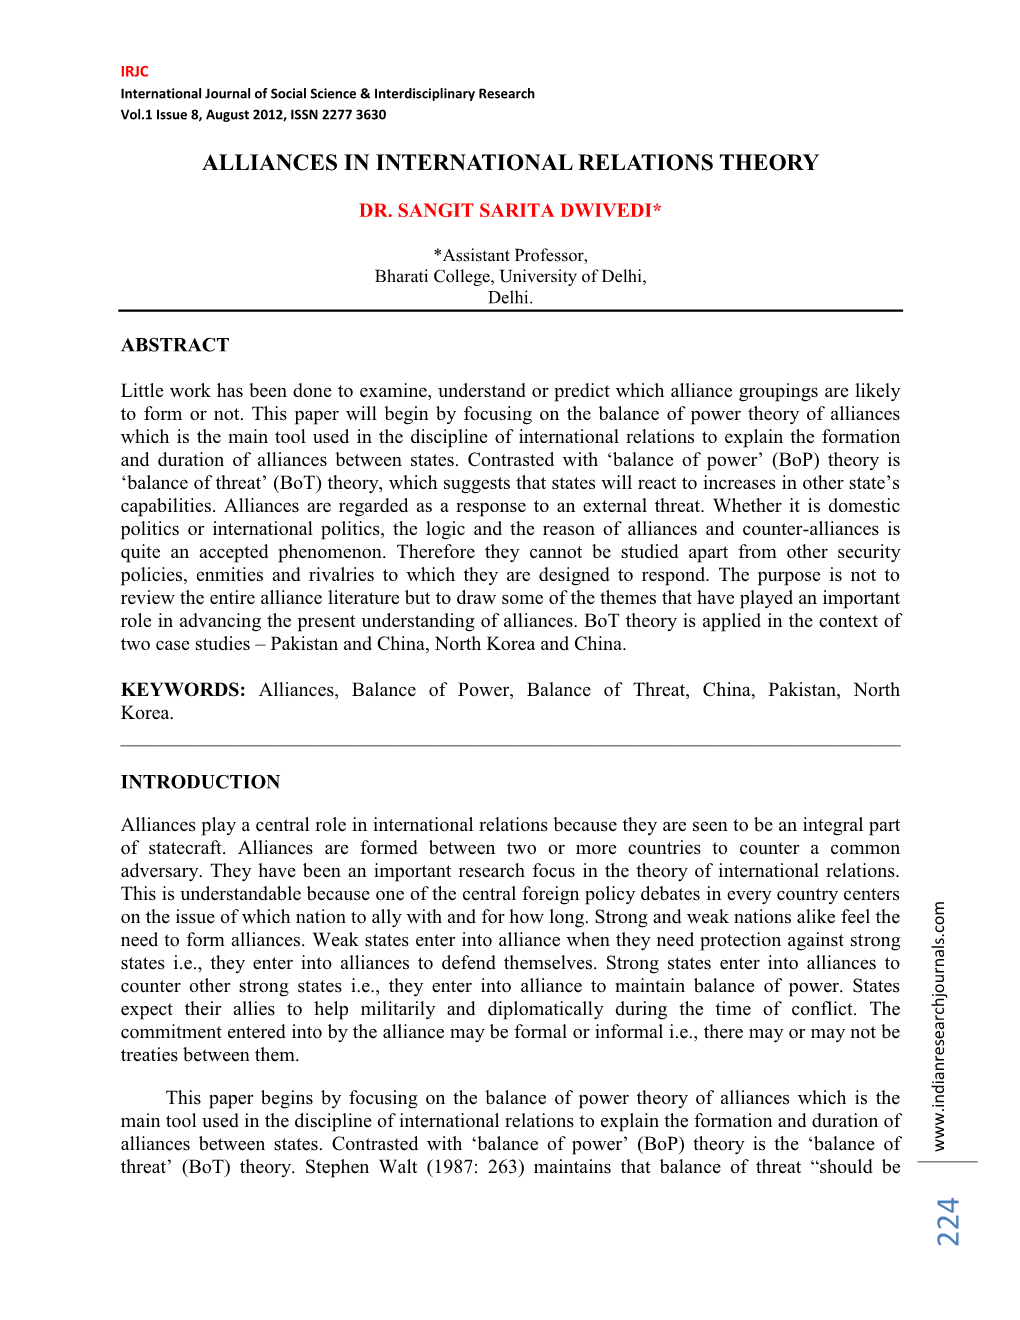 Alliances in International Relations Theory